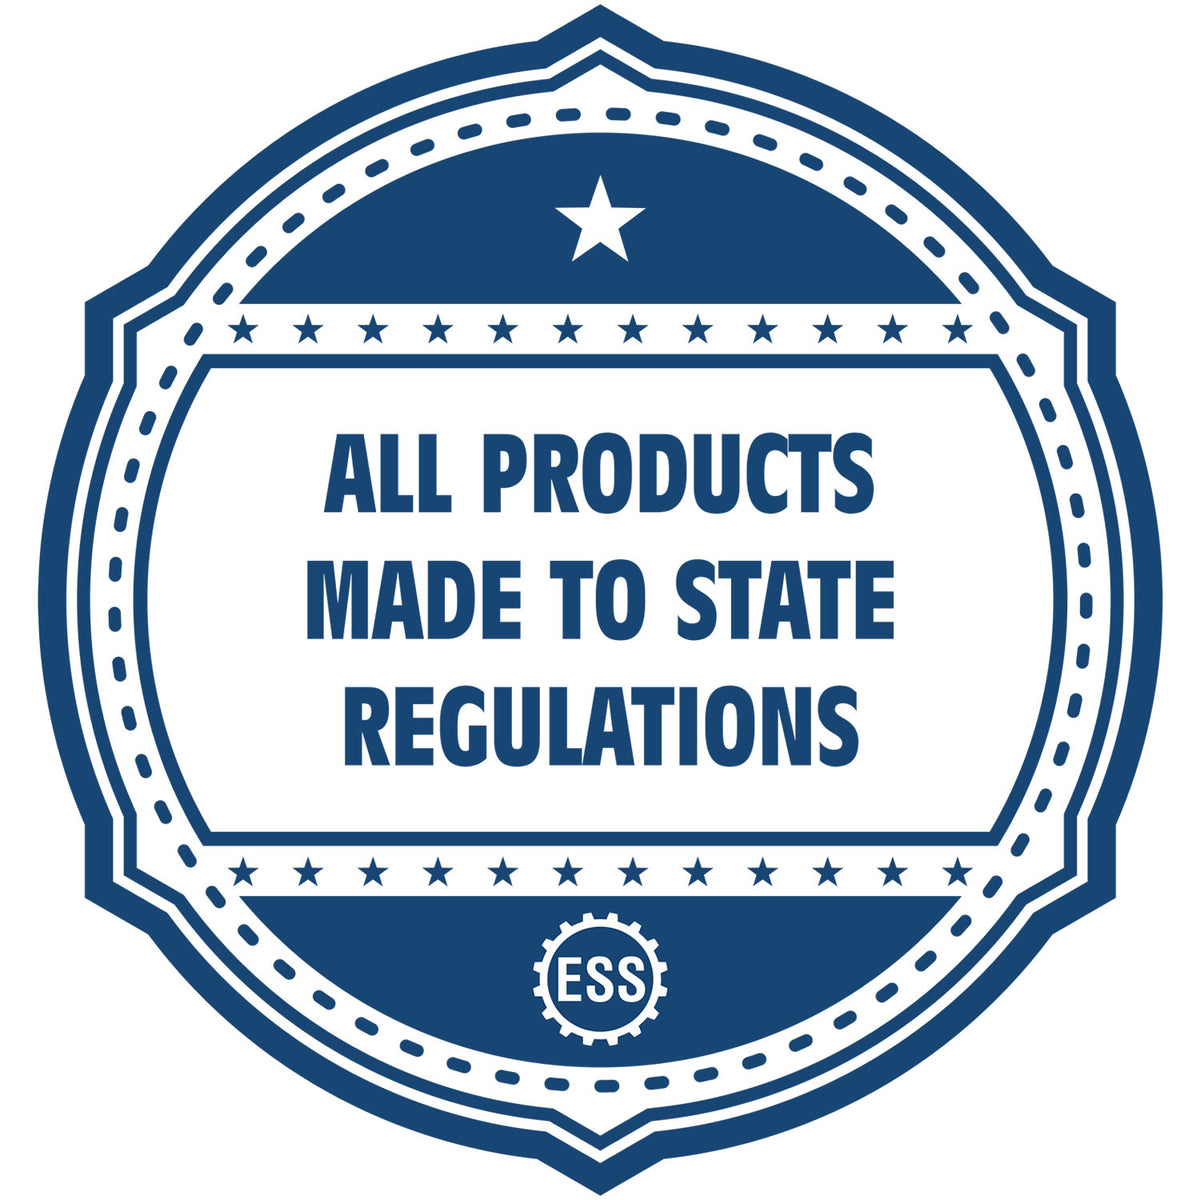 An icon or badge element for the State of Florida Soft Land Surveyor Embossing Seal showing that this product is made in compliance with state regulations.